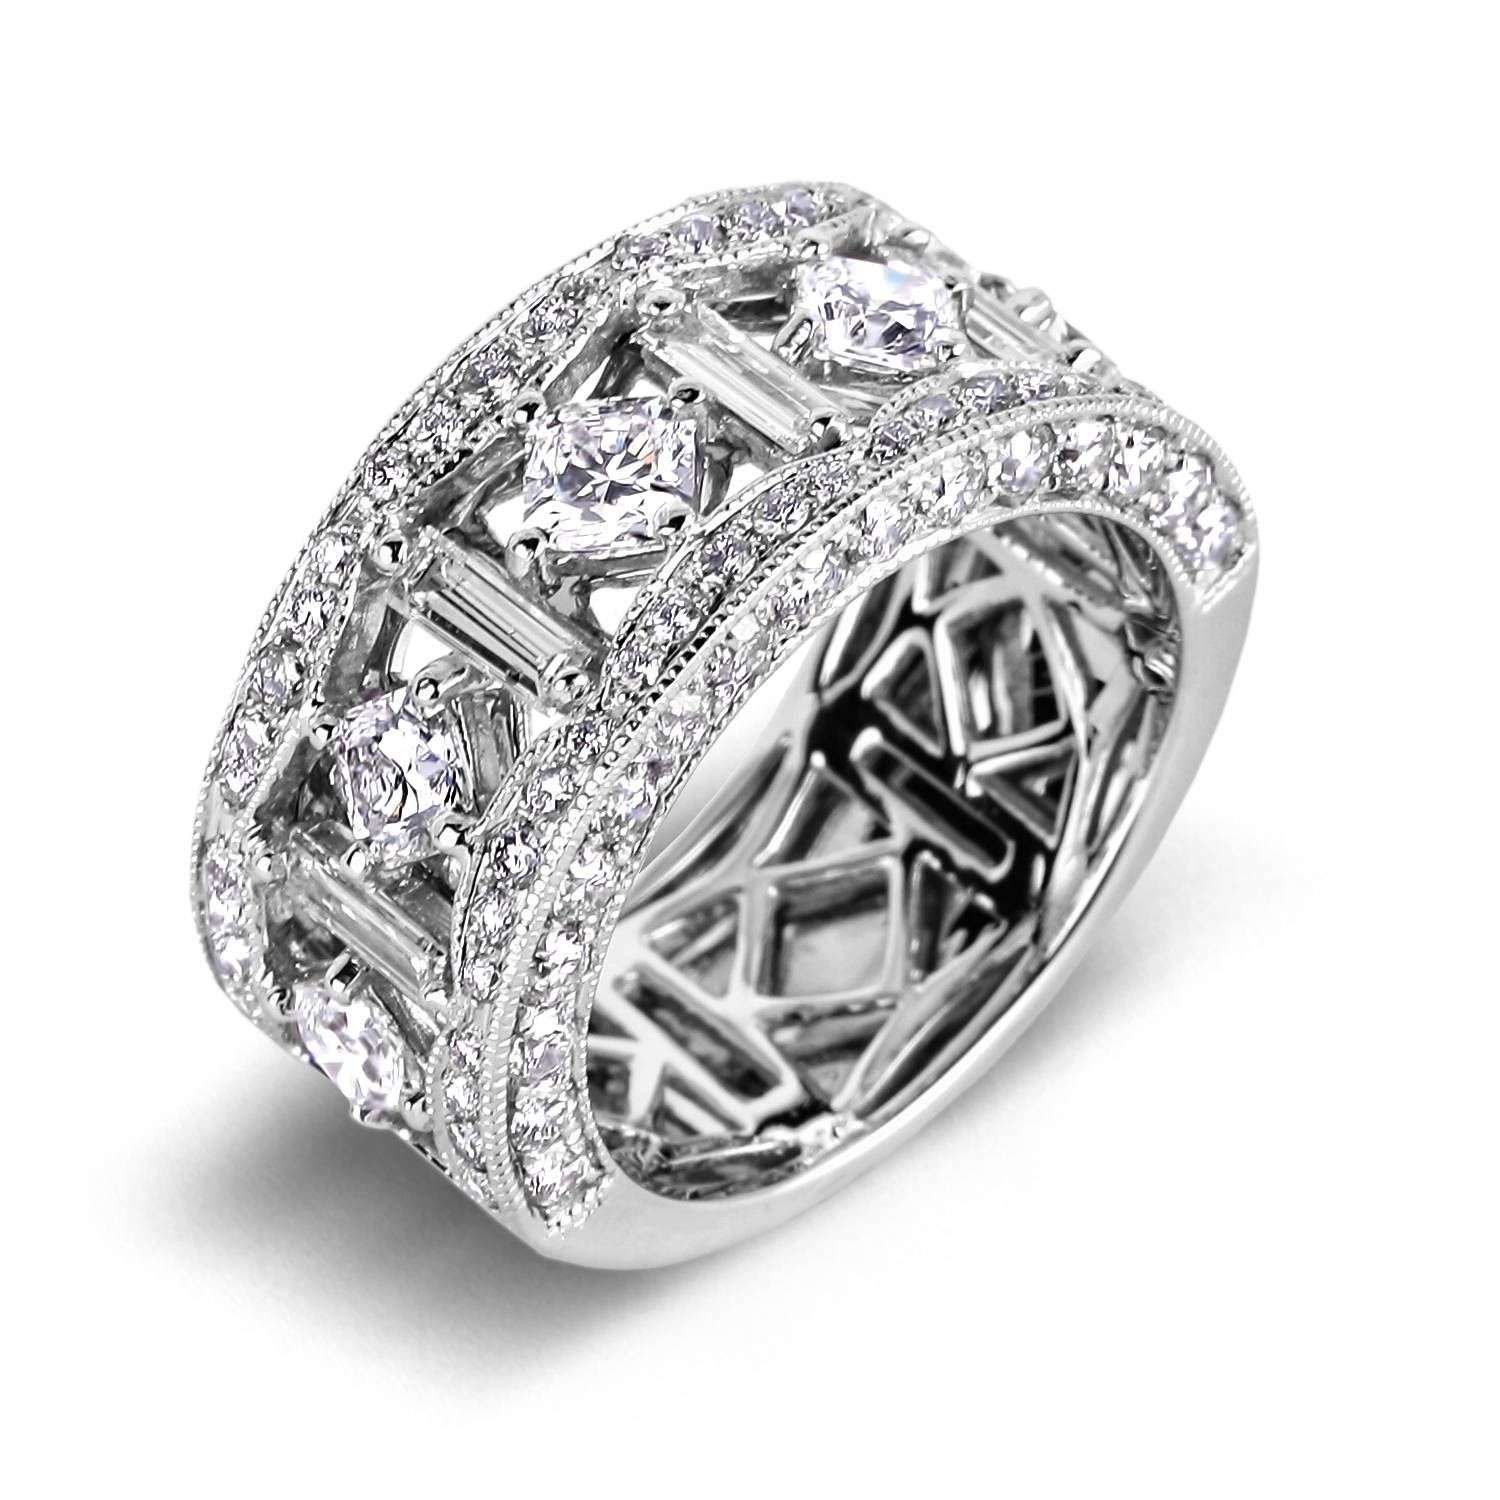 17+ Images About 10 Year Anniversary Rings On Pinterest | White In Recent 10 Year Anniversary Rings For Wife (View 1 of 15)